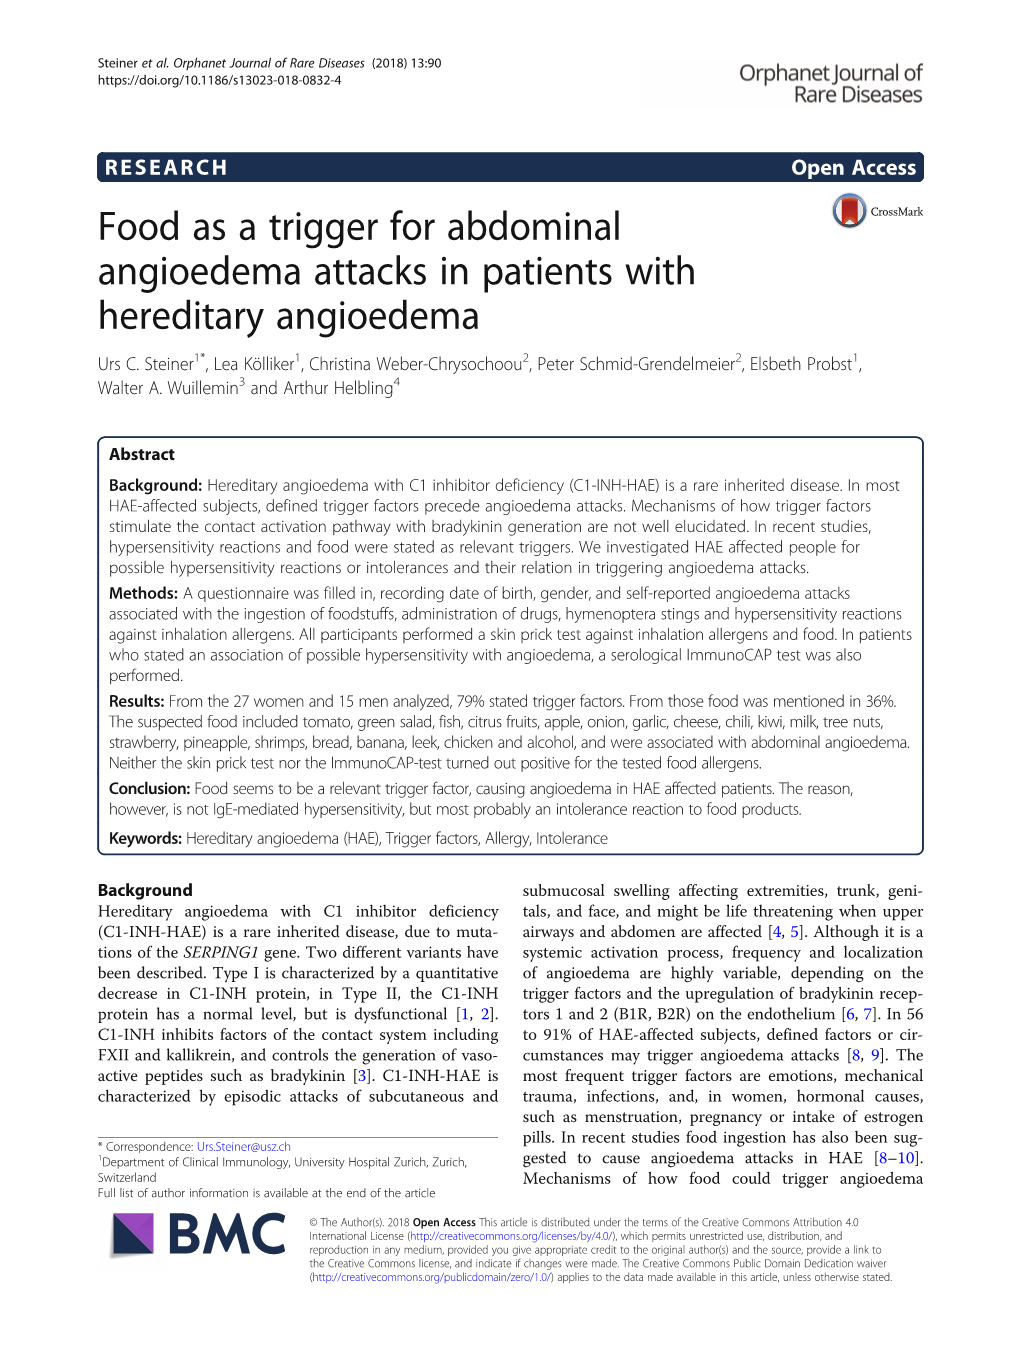 Food As a Trigger for Abdominal Angioedema Attacks in Patients with Hereditary Angioedema Urs C